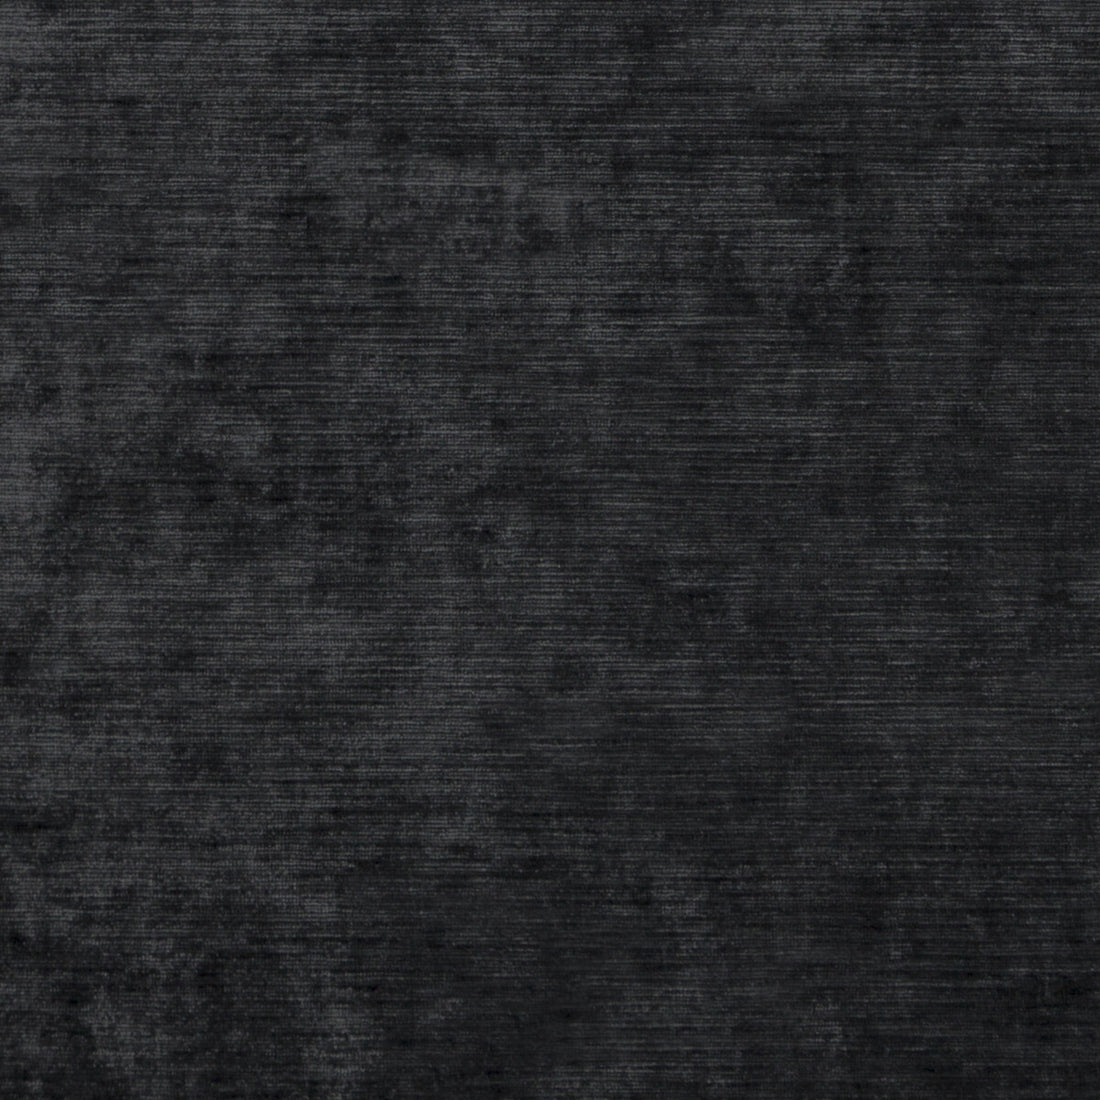 Meridian Velvet fabric in graphite color - pattern ED85292.970.0 - by Threads in the Meridian collection